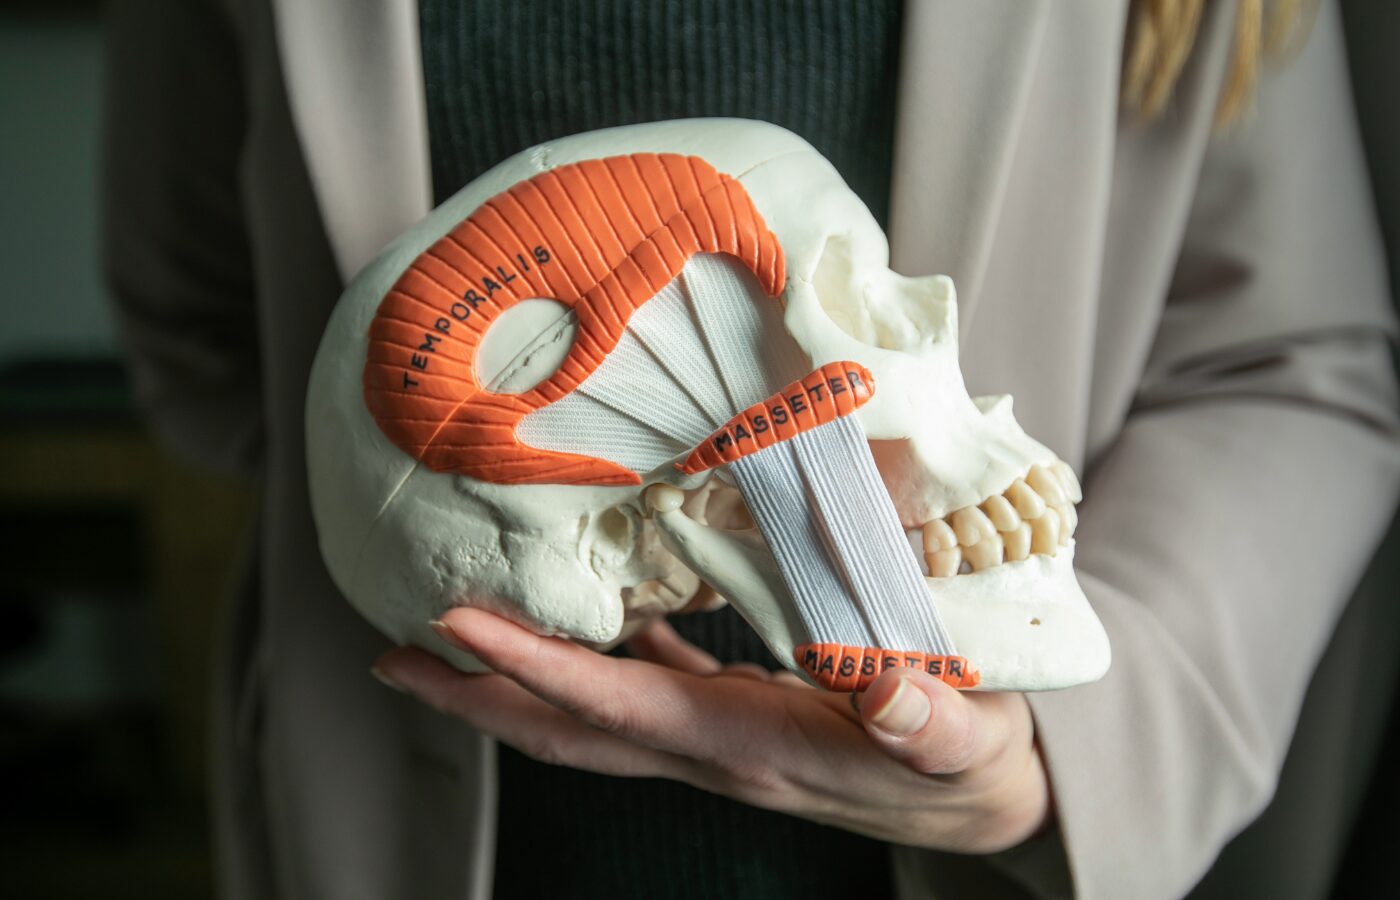 Dentist holding a model of the skull with muscles, joints and bite showing